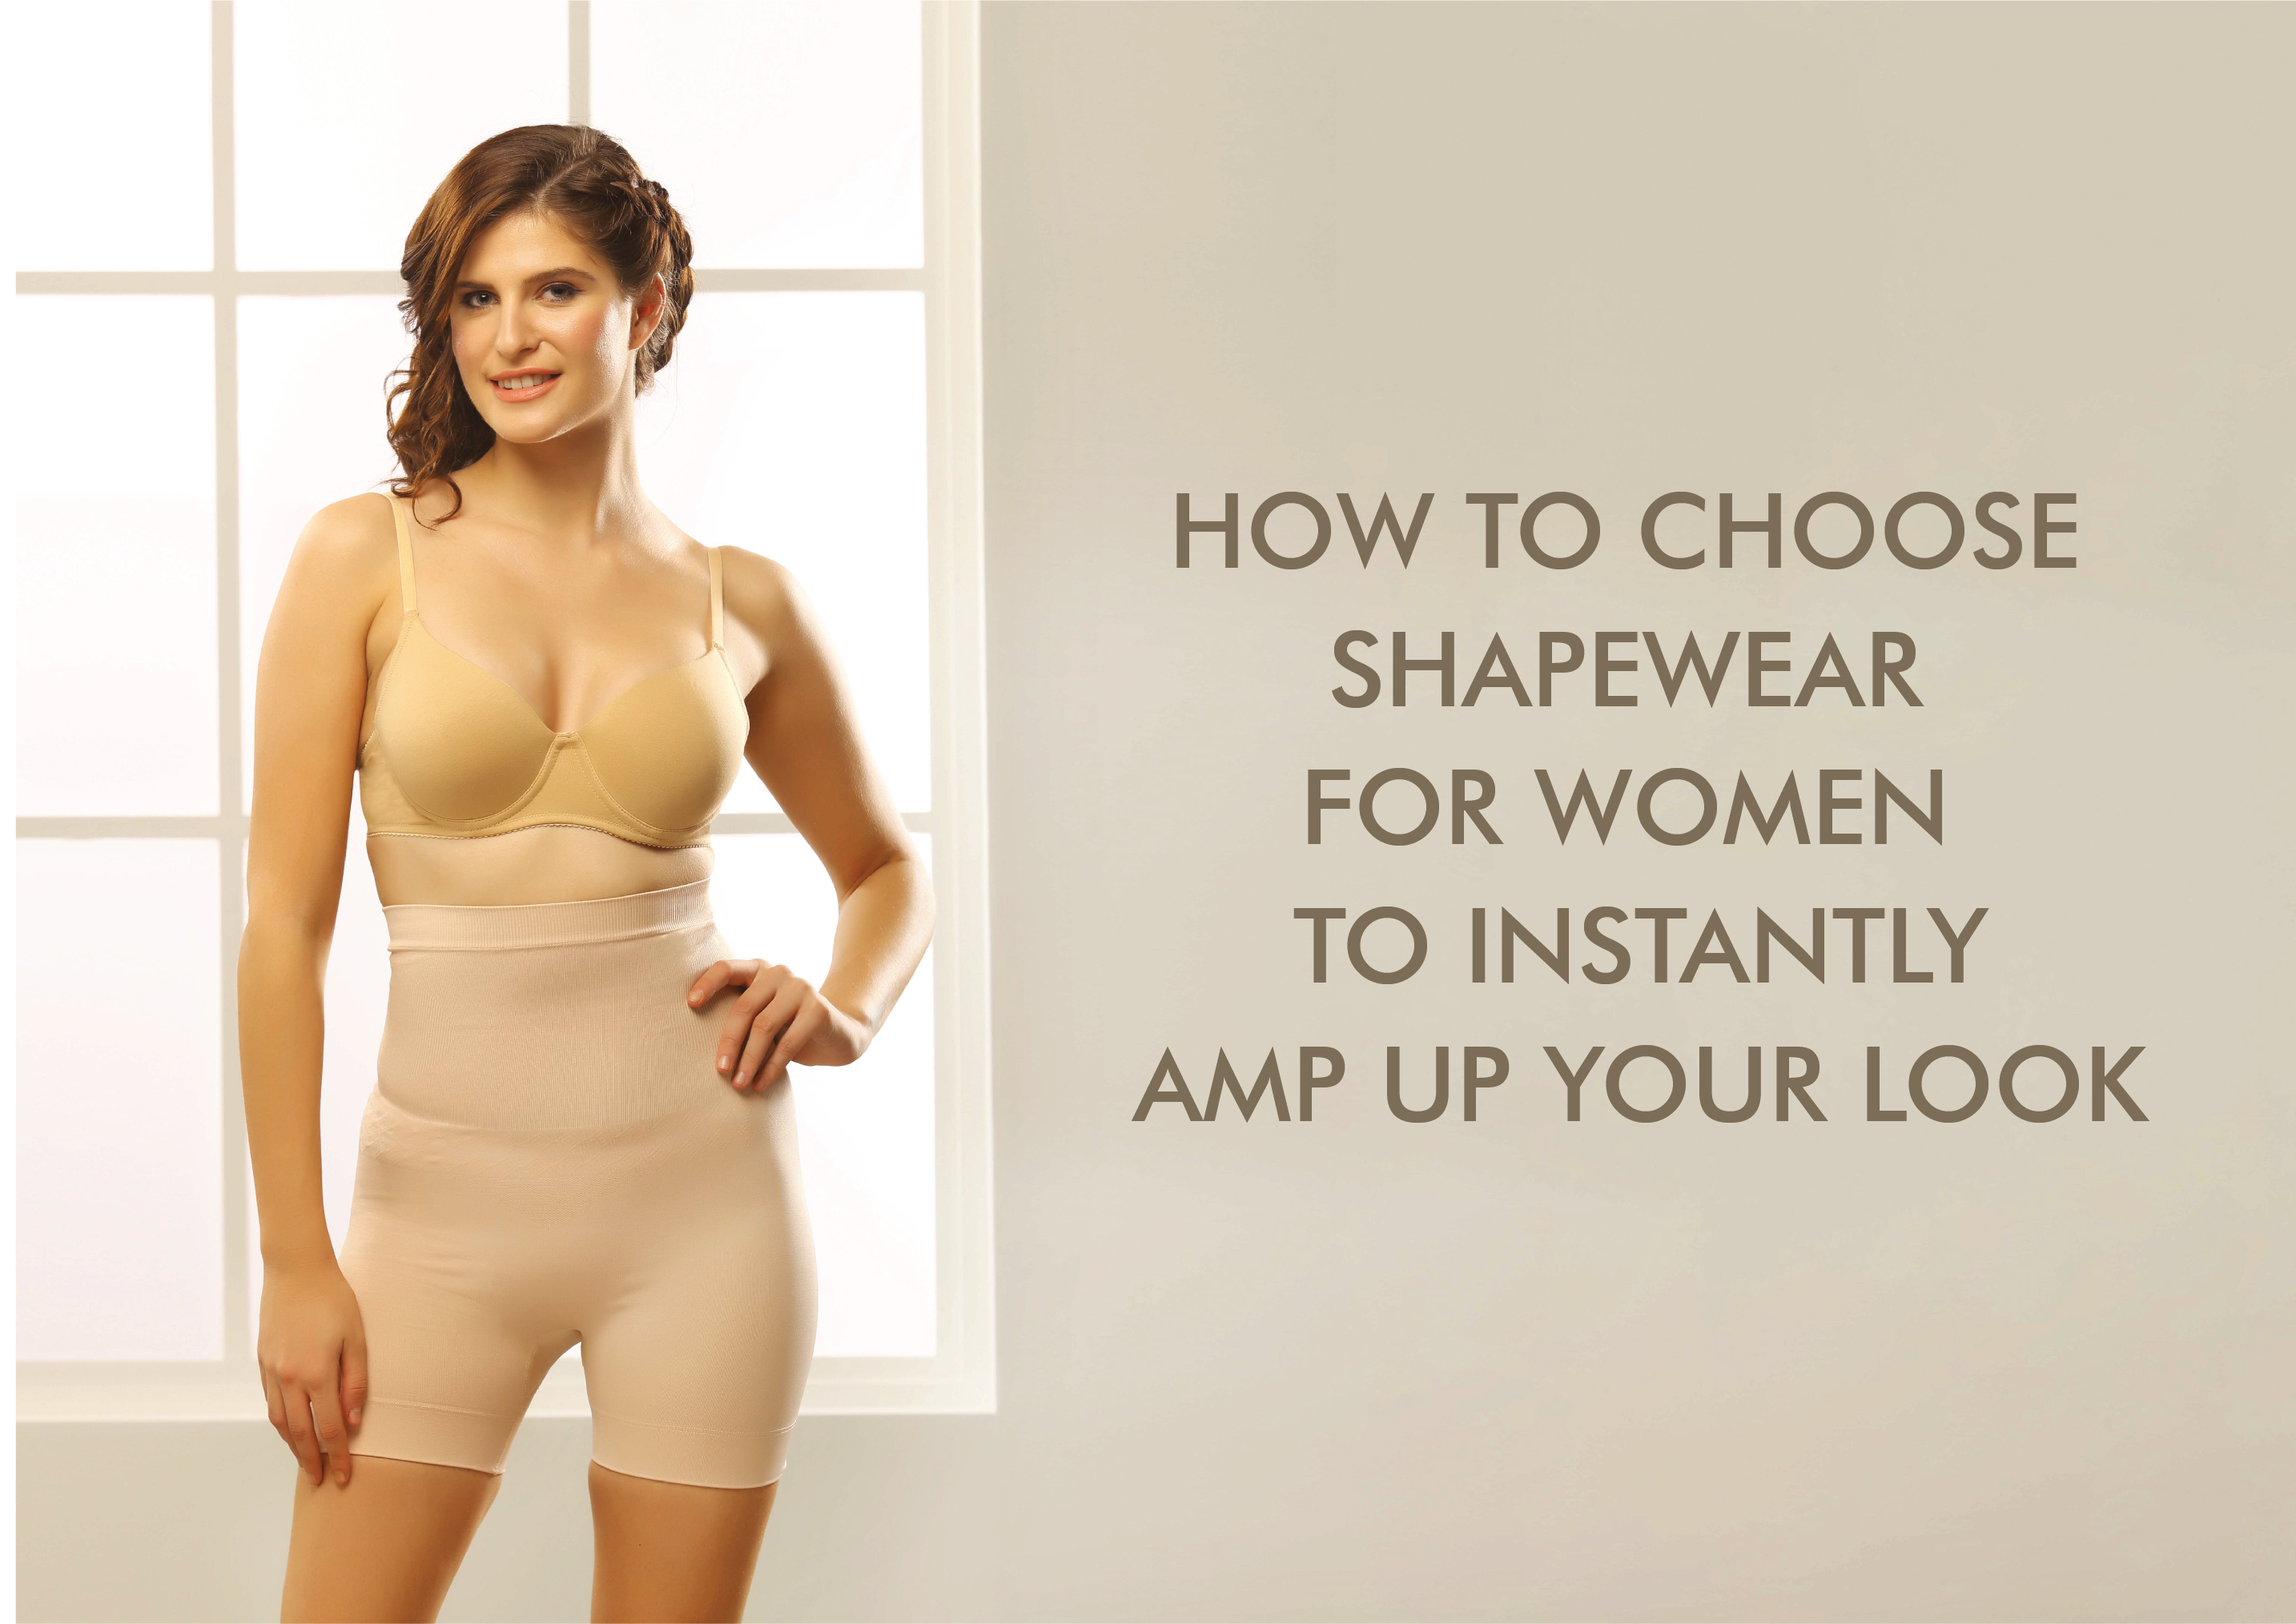 6 Things You Need to Consider When Getting Shapewear